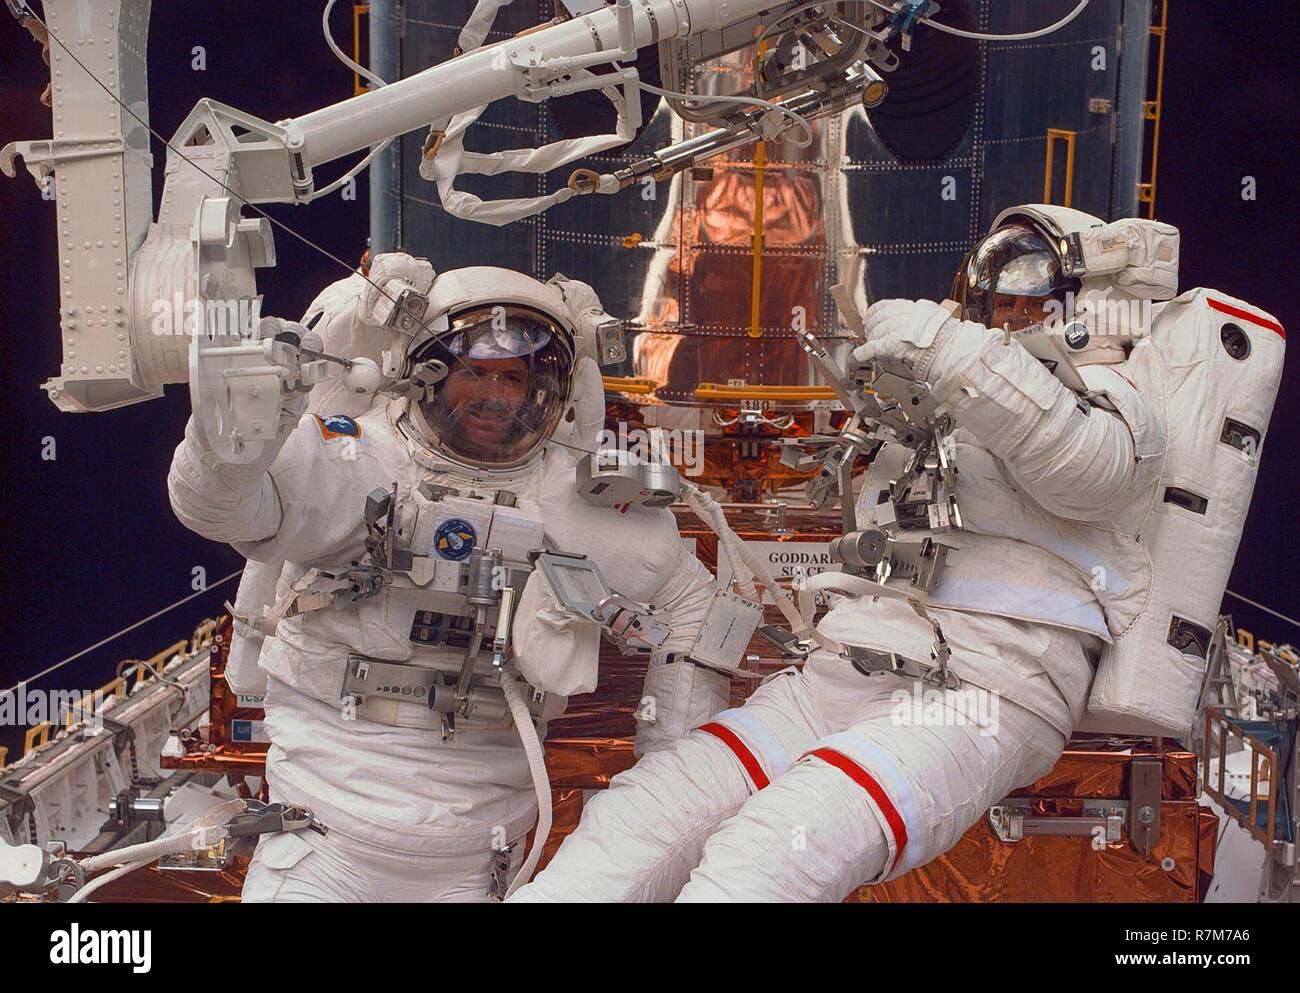 American astronauts Steven Smith, left, and Mark Lee work on maintenance and upgrading of the Hubble Space Telescope attached to the cargo by of Space Shuttle Discovery February 16, 1997 in Earth Orbit. Stock Photo